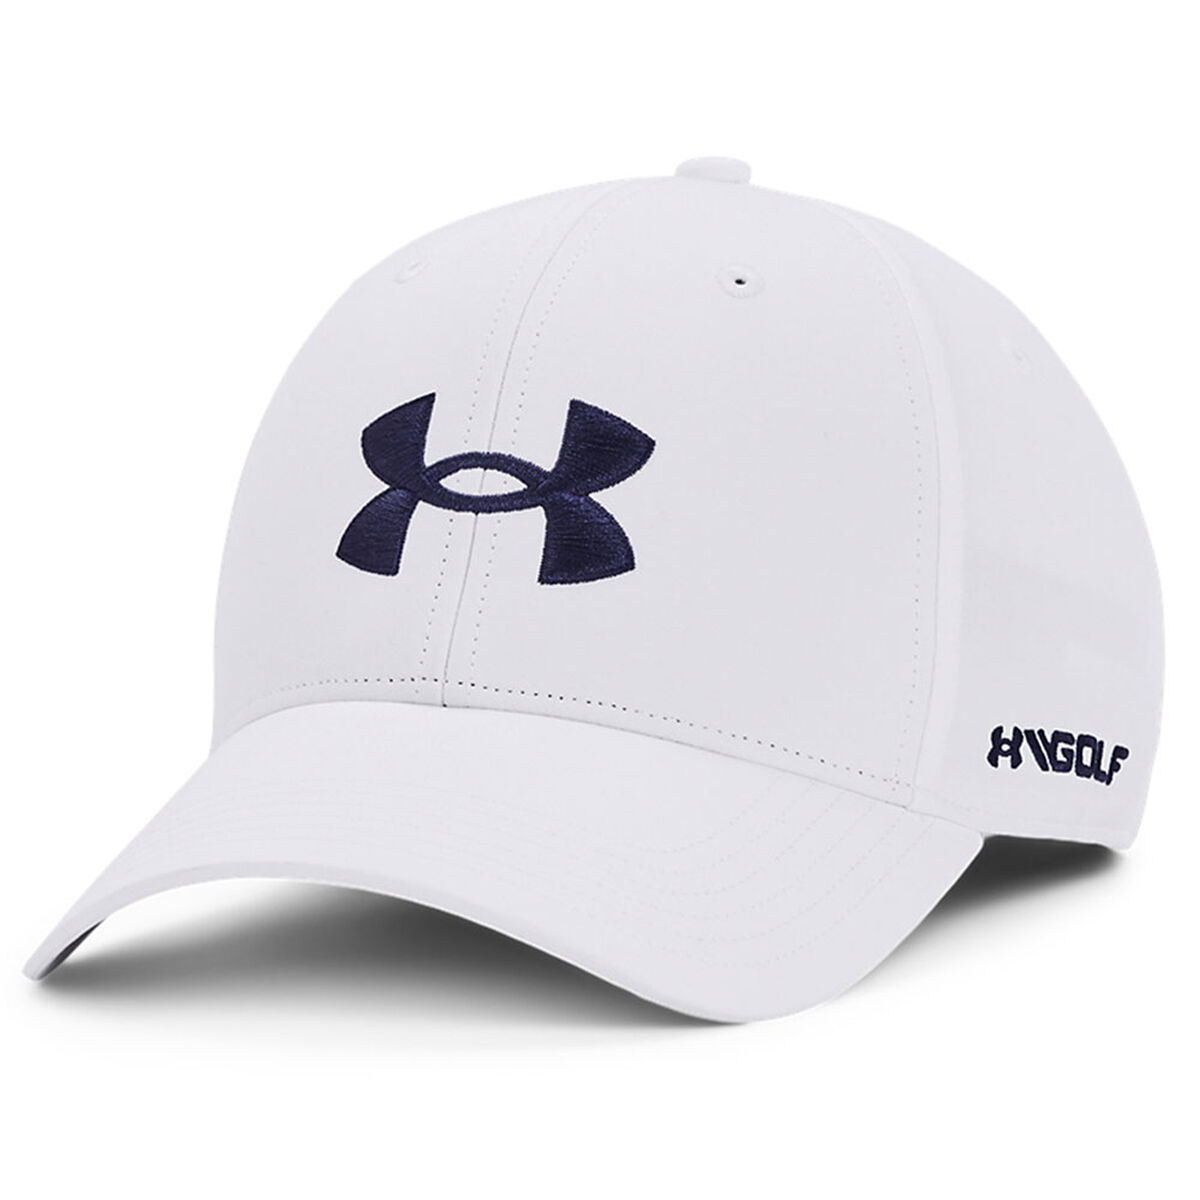 Under Armour Men’s White and Navy Blue Lightweight 96 Golf Cap | American Golf, One Size